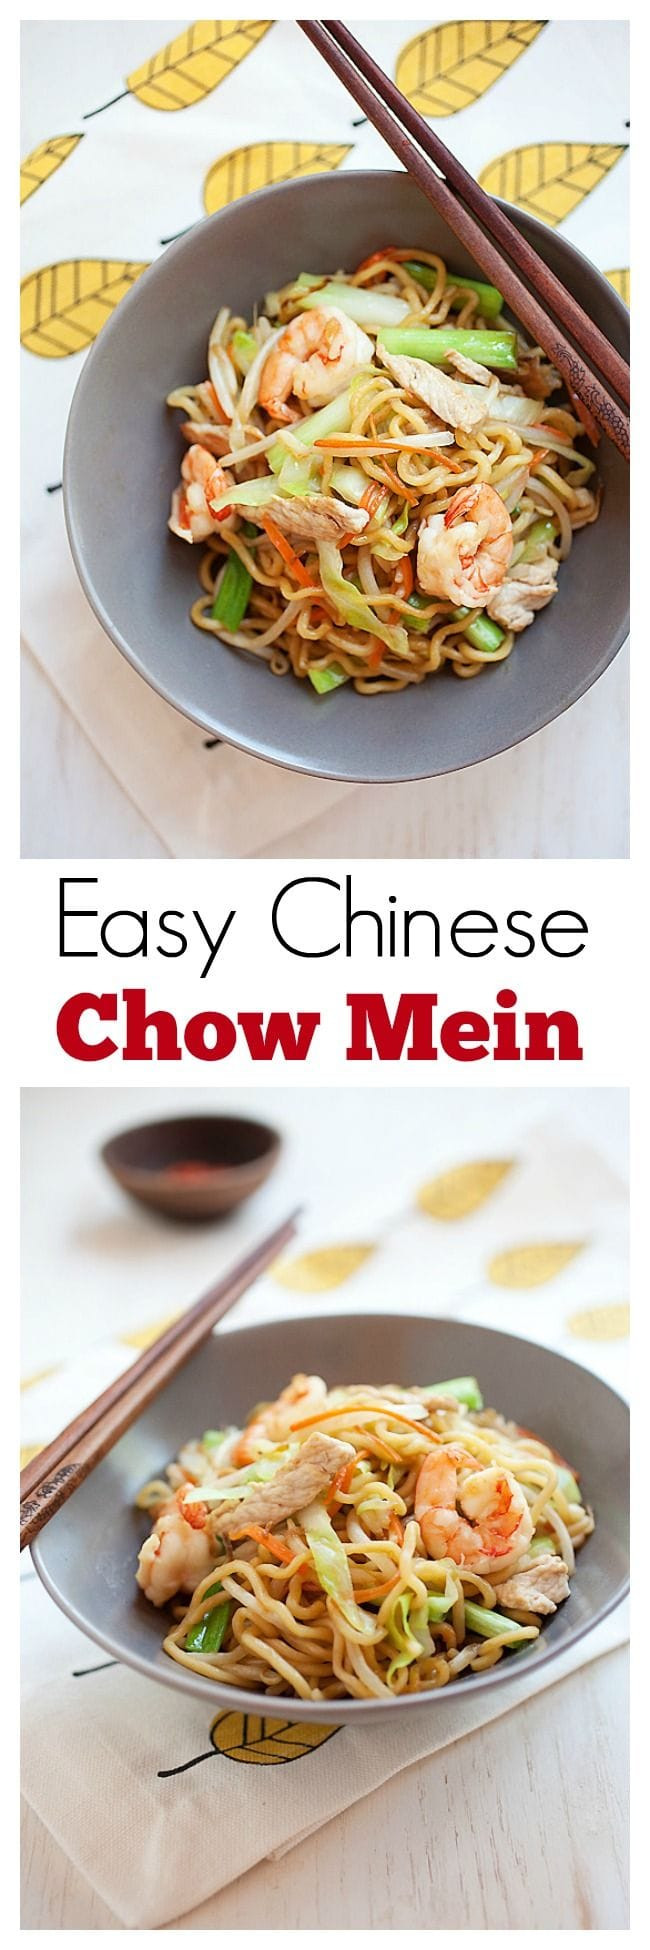 Chinese Chow Mein Recipes
 Chow Mein Chinese Noodles Recipe